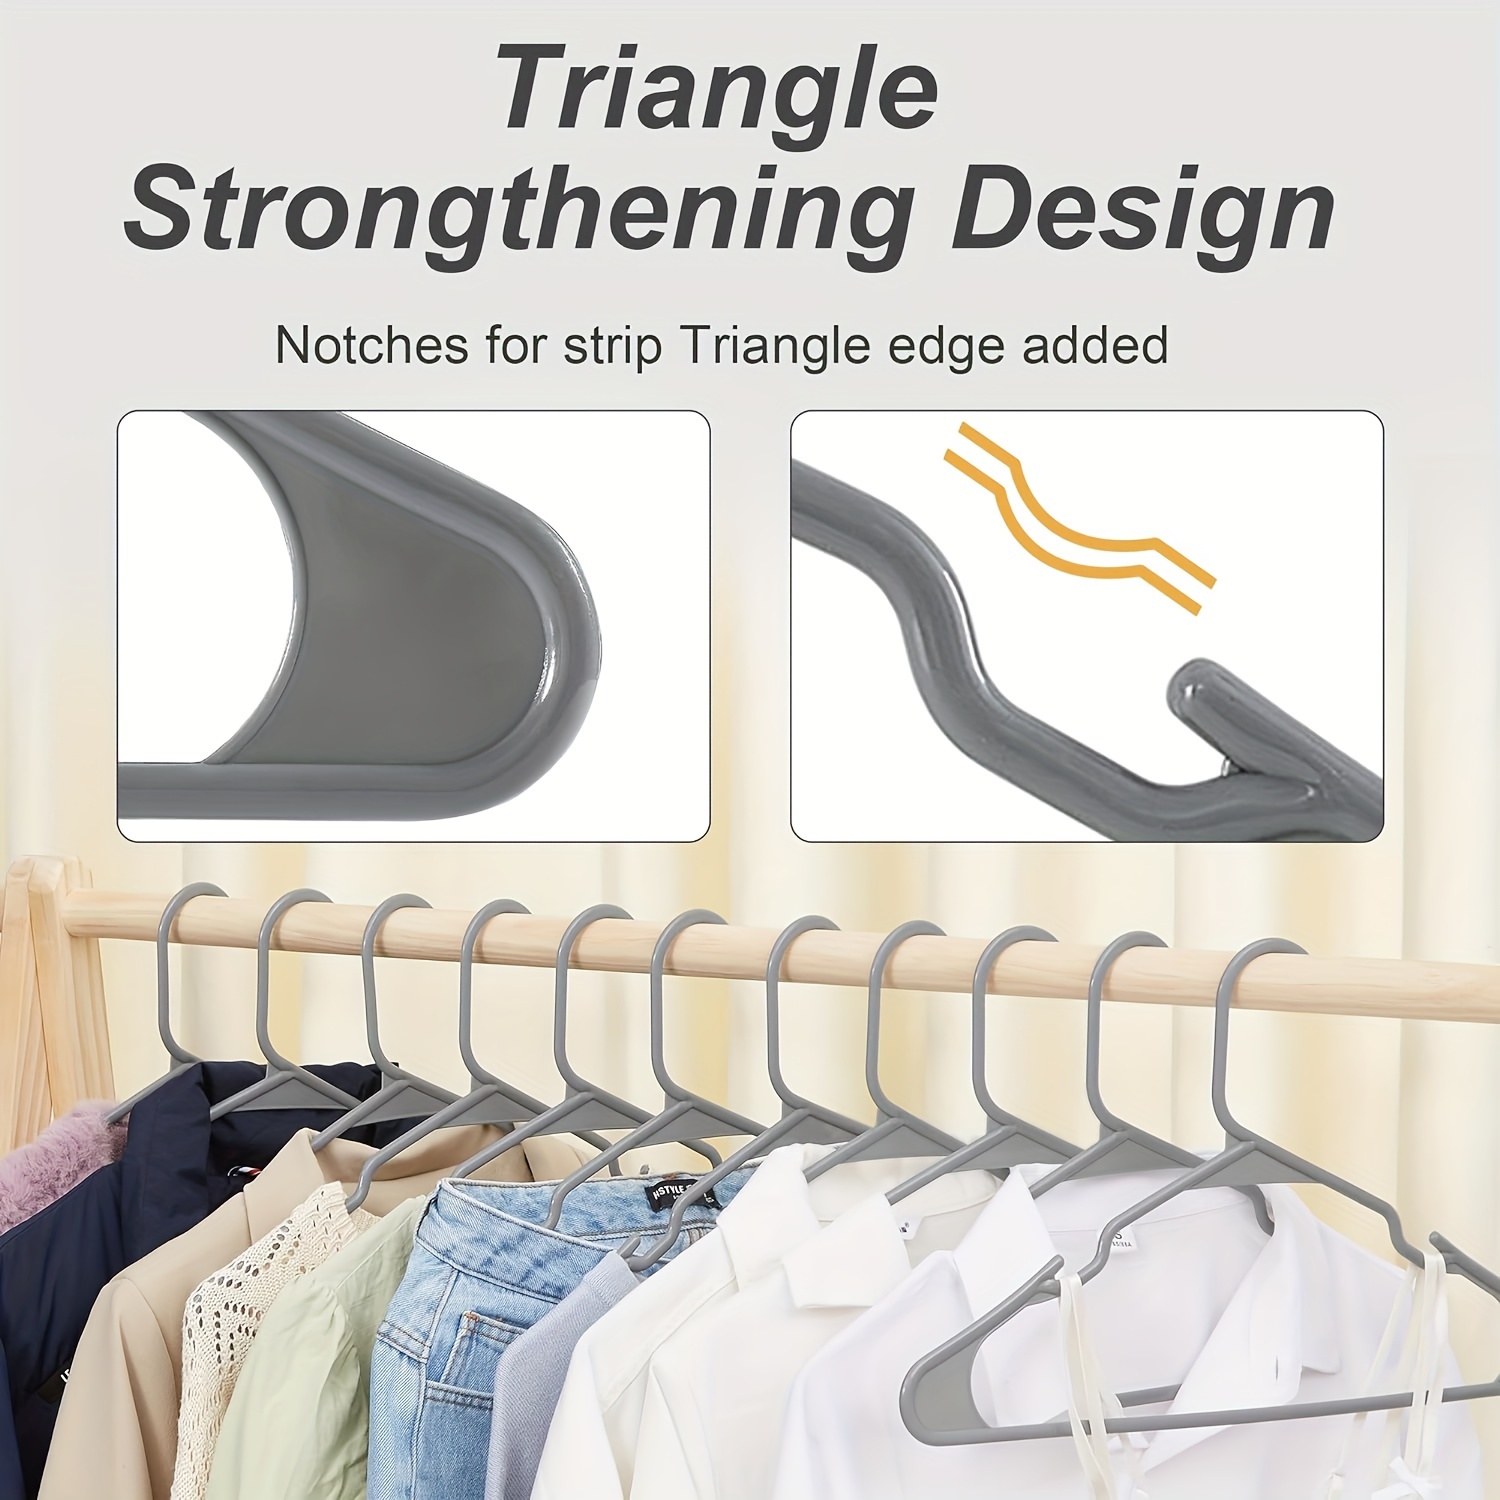 20 piece Pack High quality white plastic hangers - Space saving notch  hangers - Durable fiber thin - shoulder grooves 